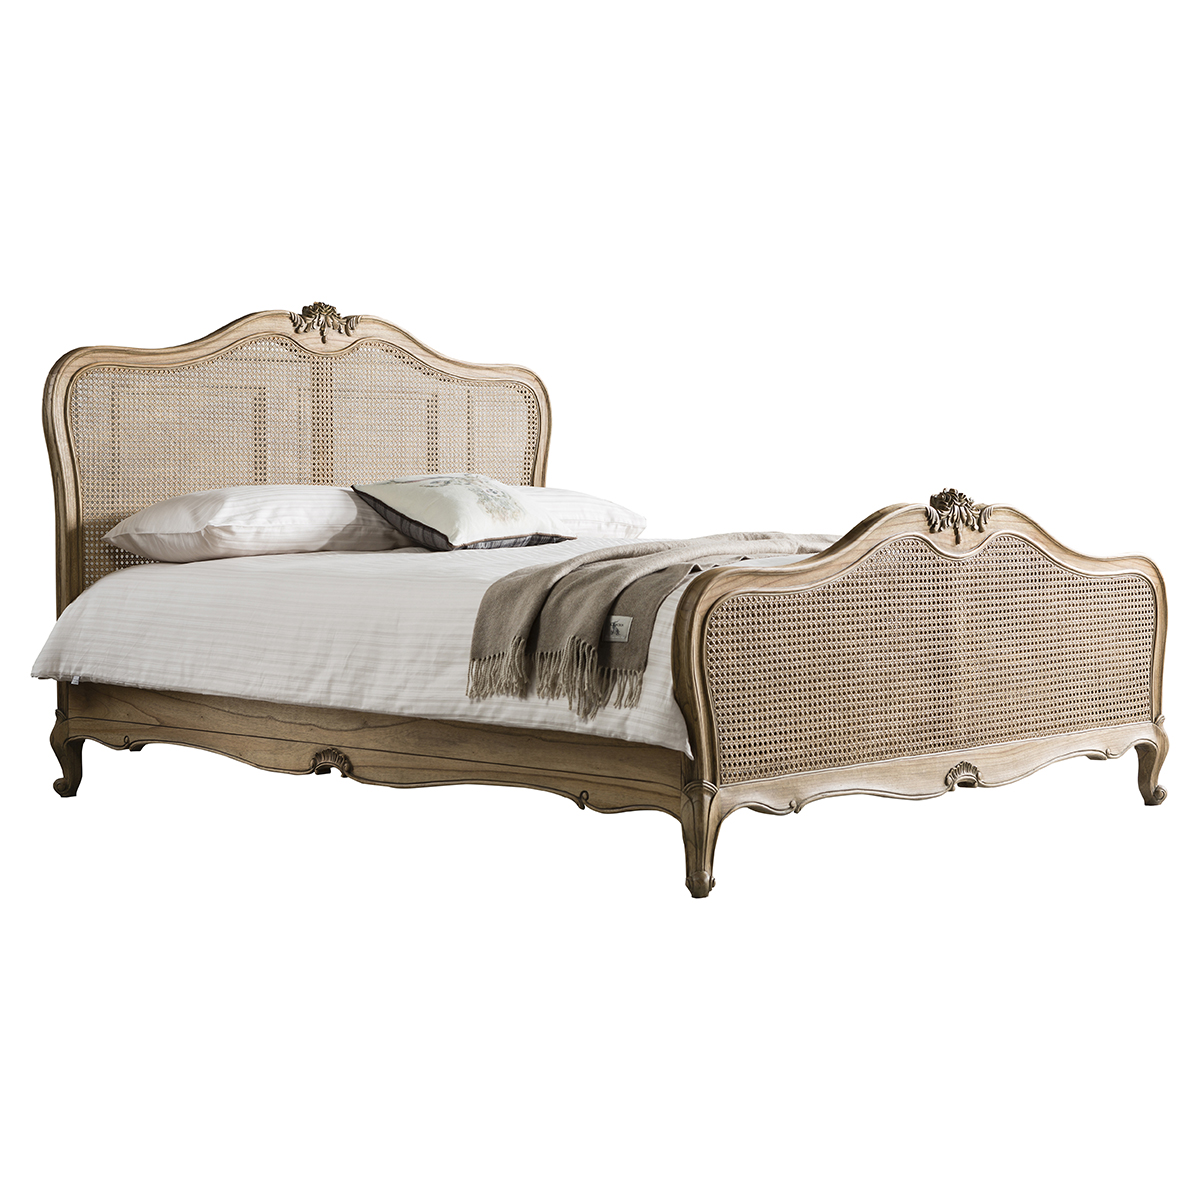 Gallery Direct Chic 5' Cane Bed Weathered